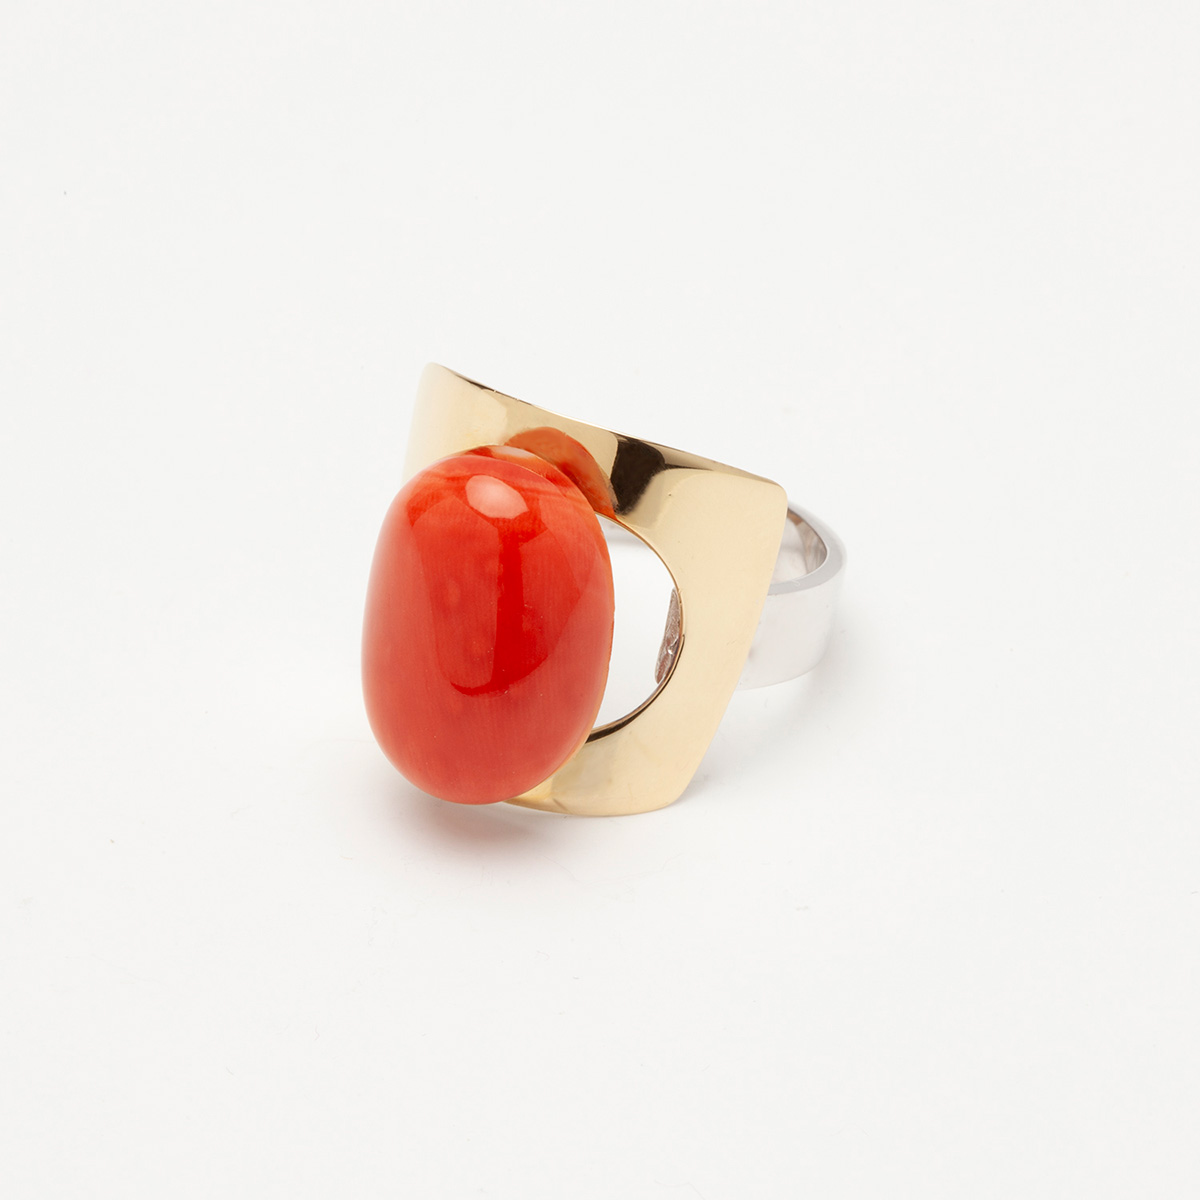 Uda handmade ring in 9k or 18k gold, sterling silver and coral 1 designed by Belen Bajo